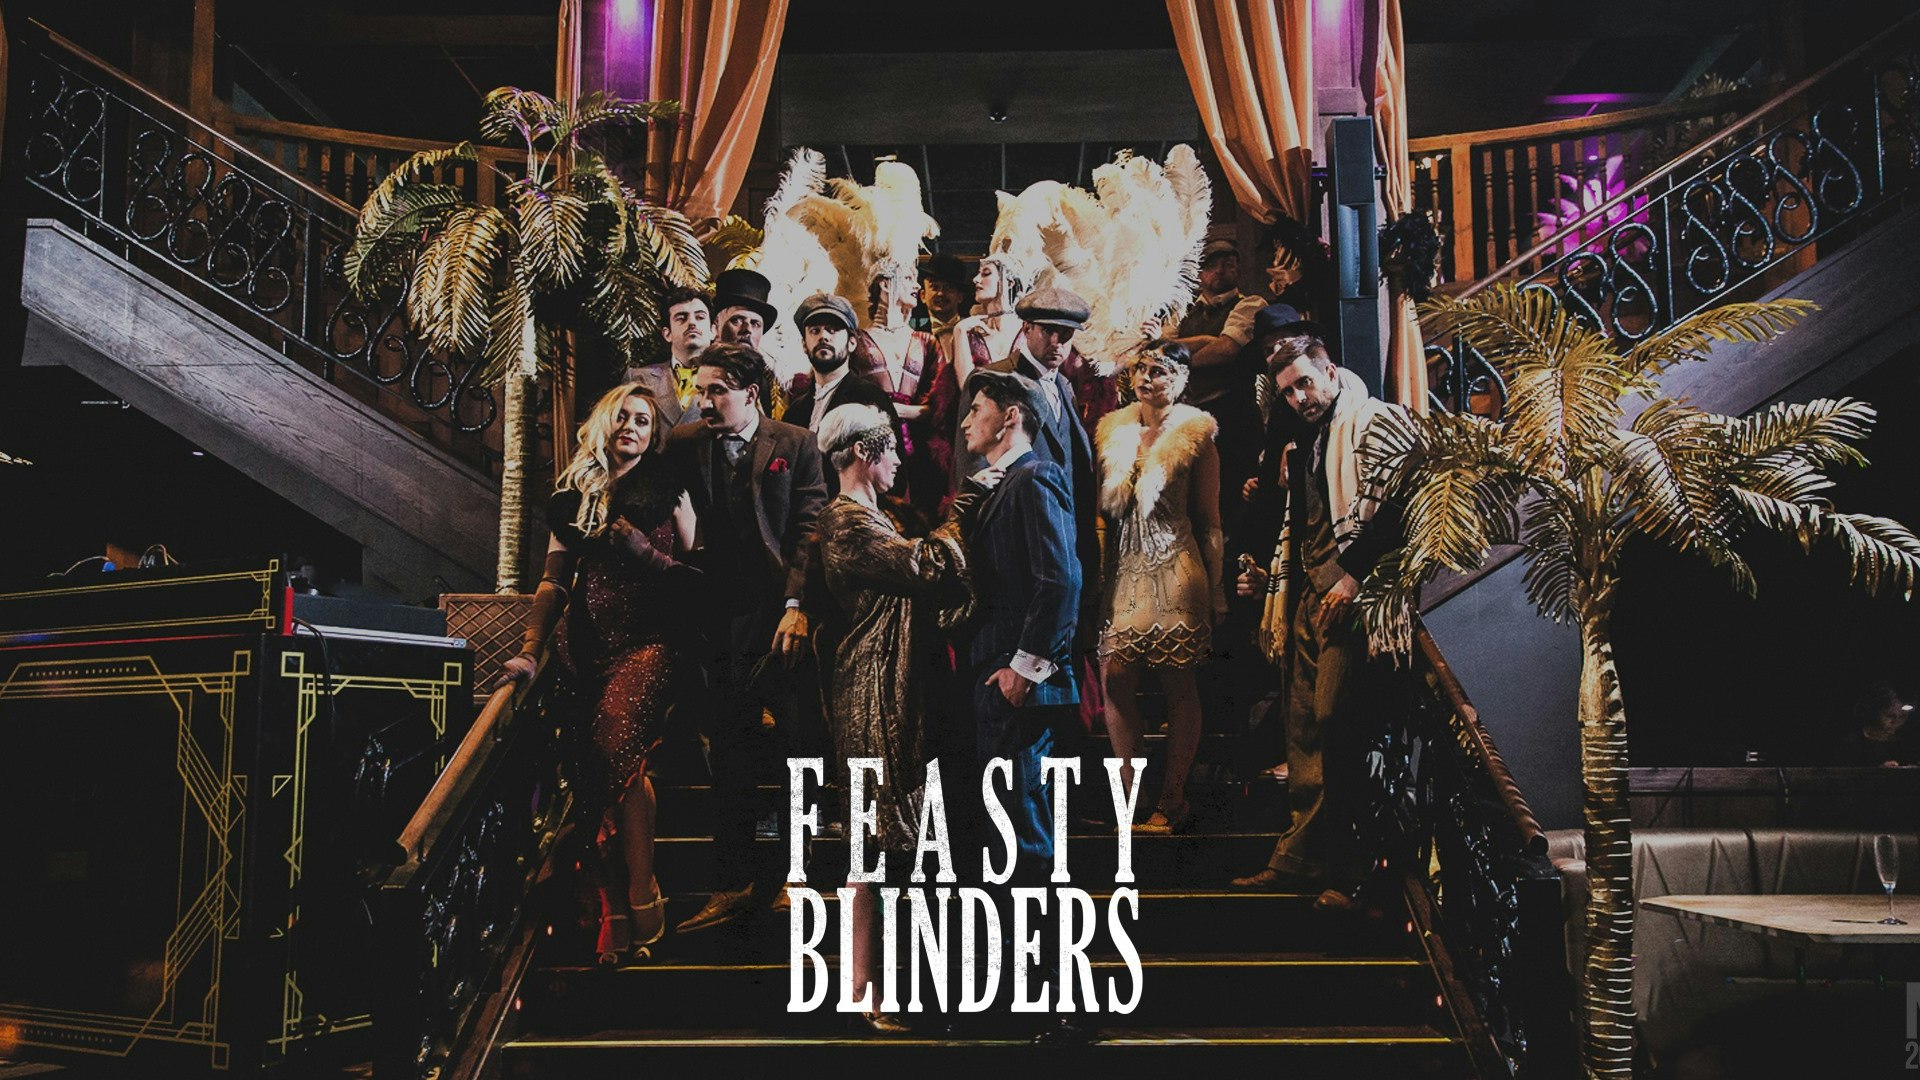 SOLD OUT – Feasty Blinders – The New Years Eve Ball | An Immersive Peaky Blinders Event